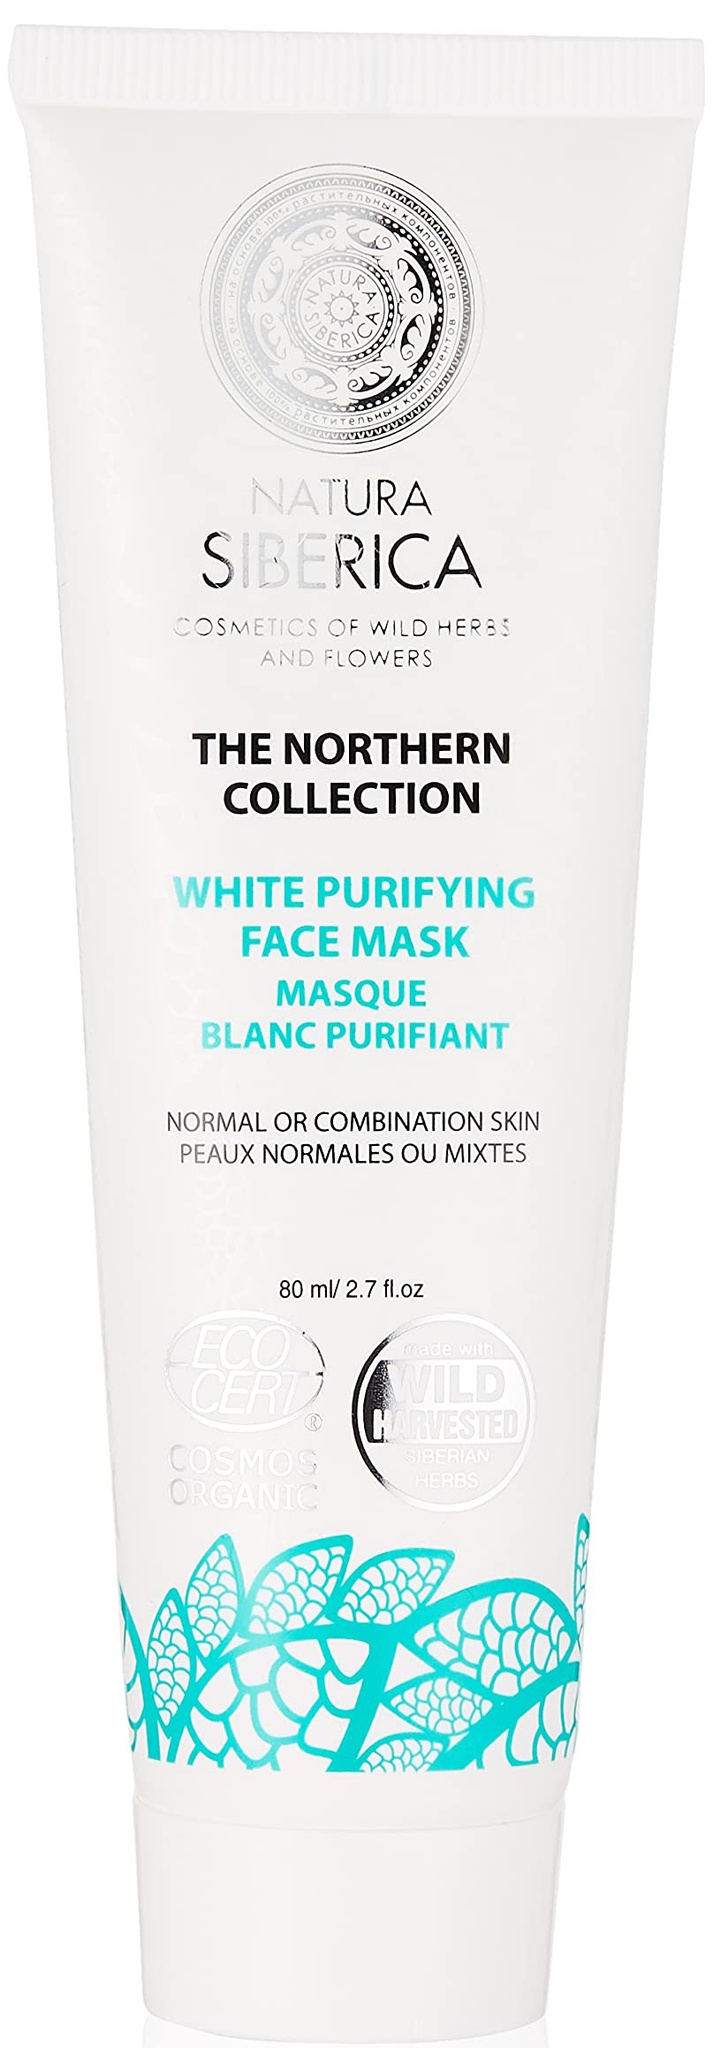 Natura Siberica The Northern Collection White Purifying Face Mask